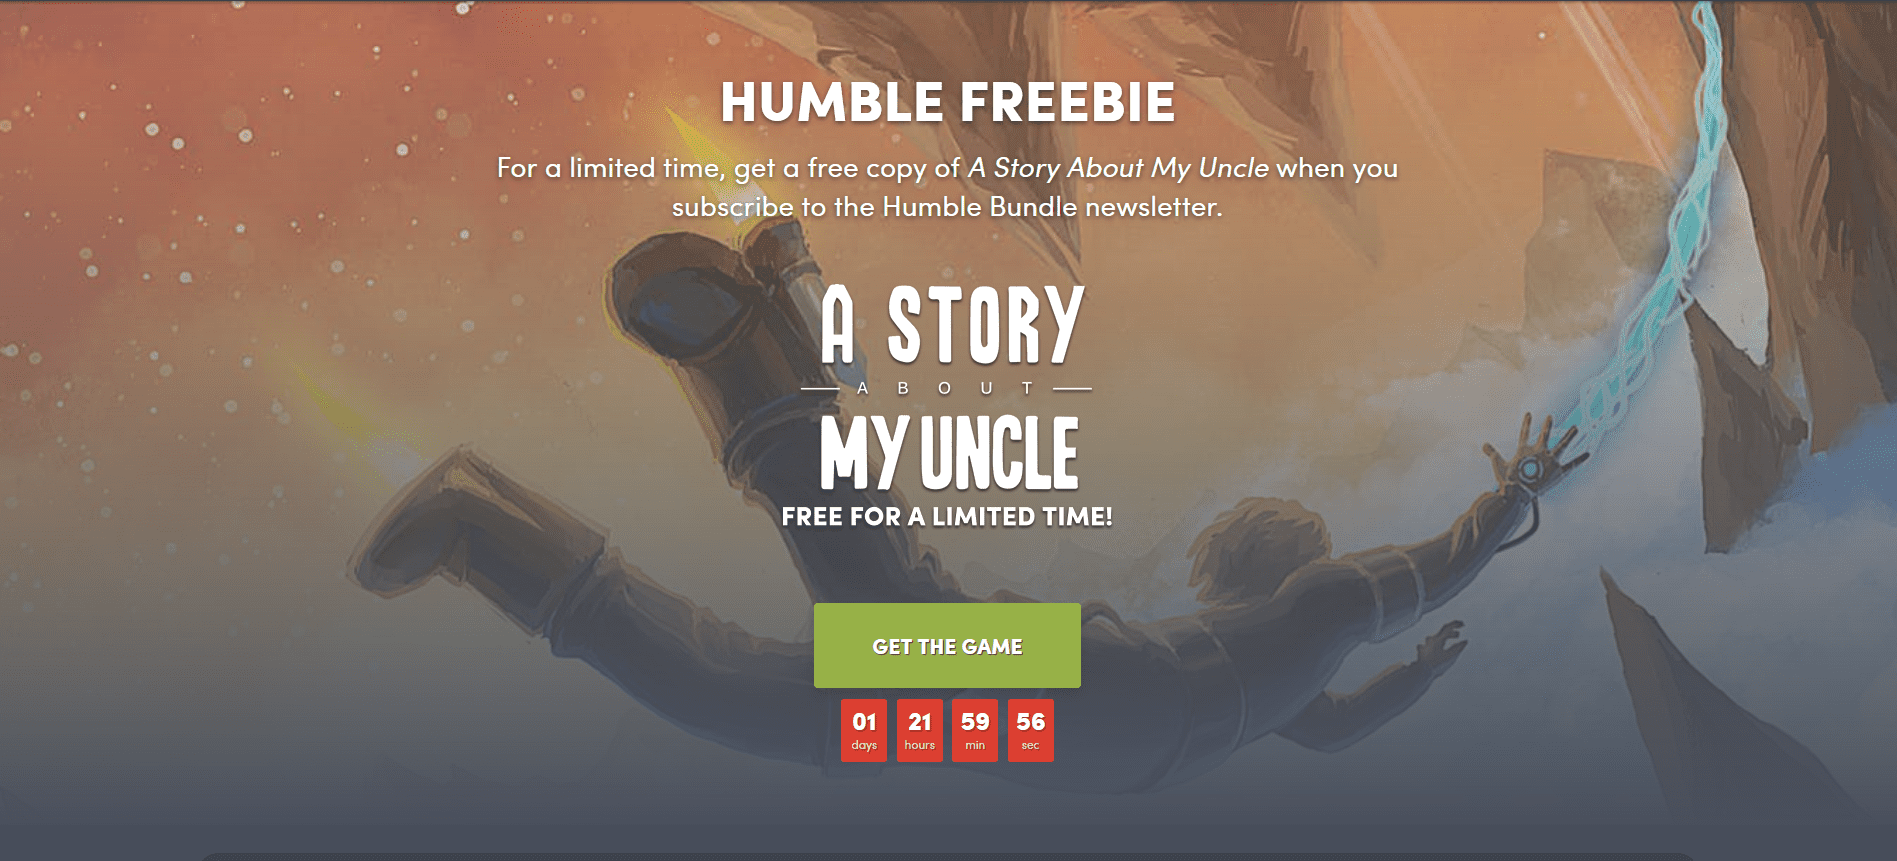 A Story About My Uncle is Free on Humble Bundle